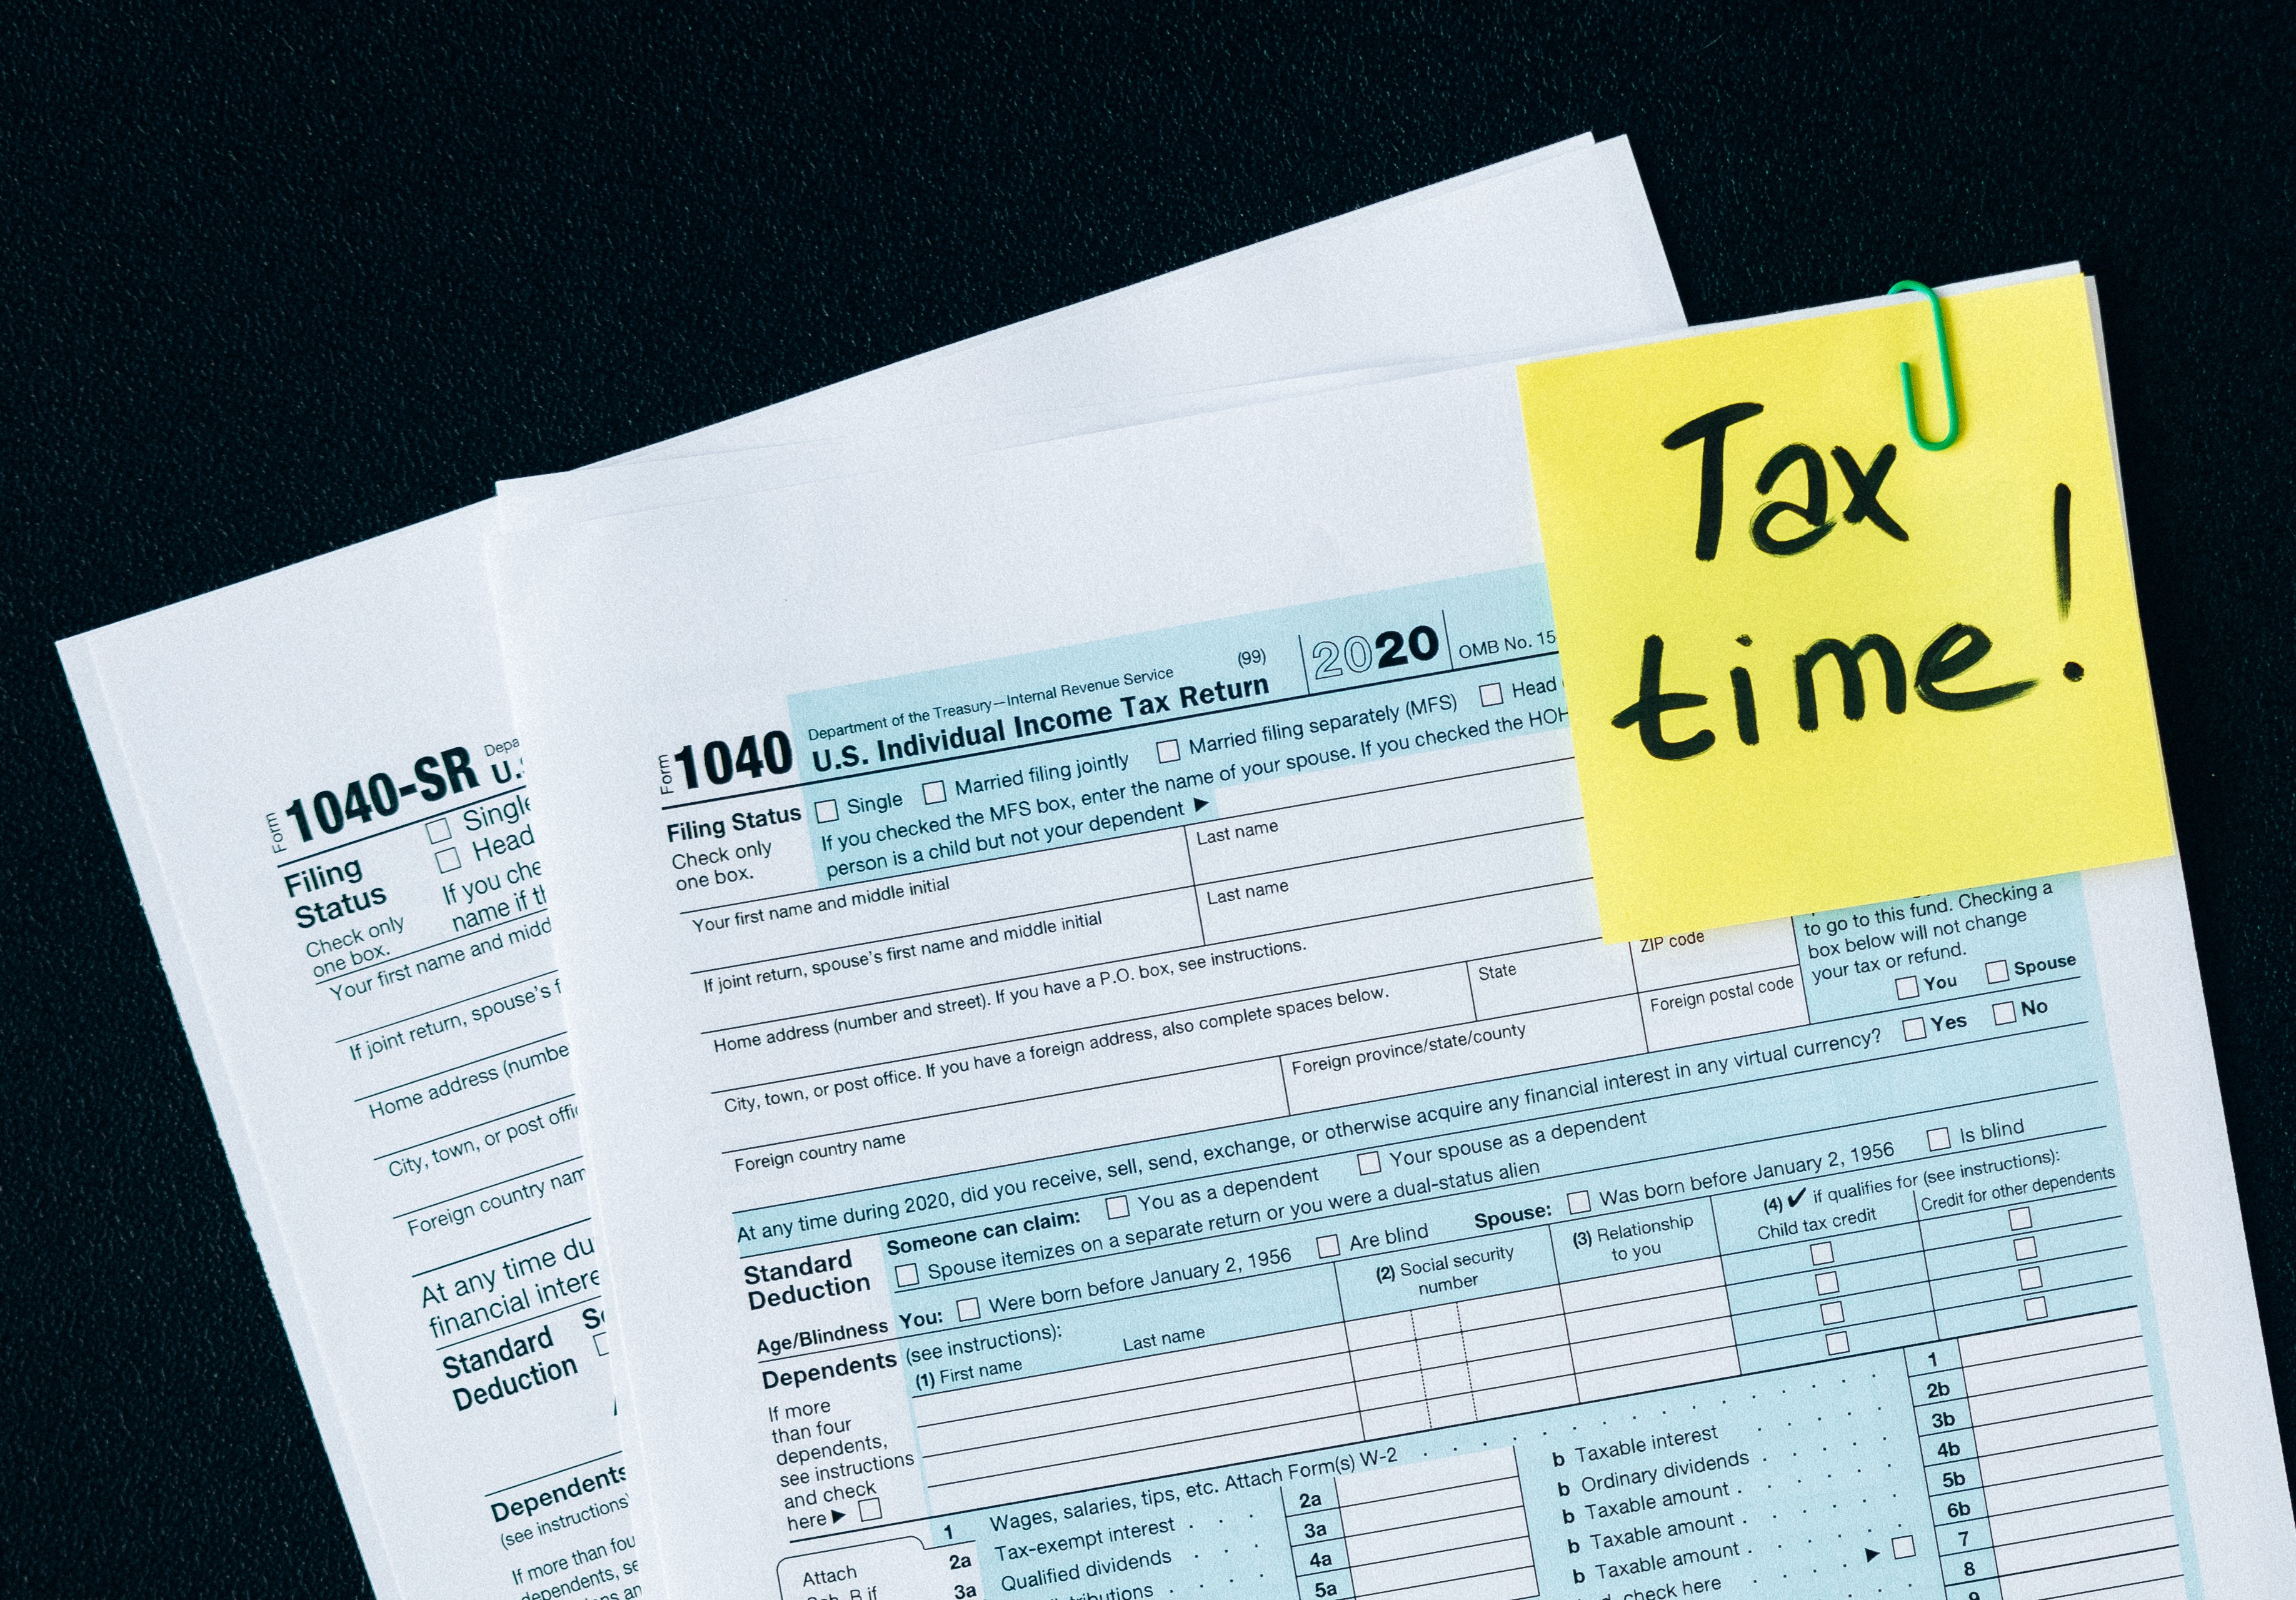 AARP to Offer Tax Prep Help Again